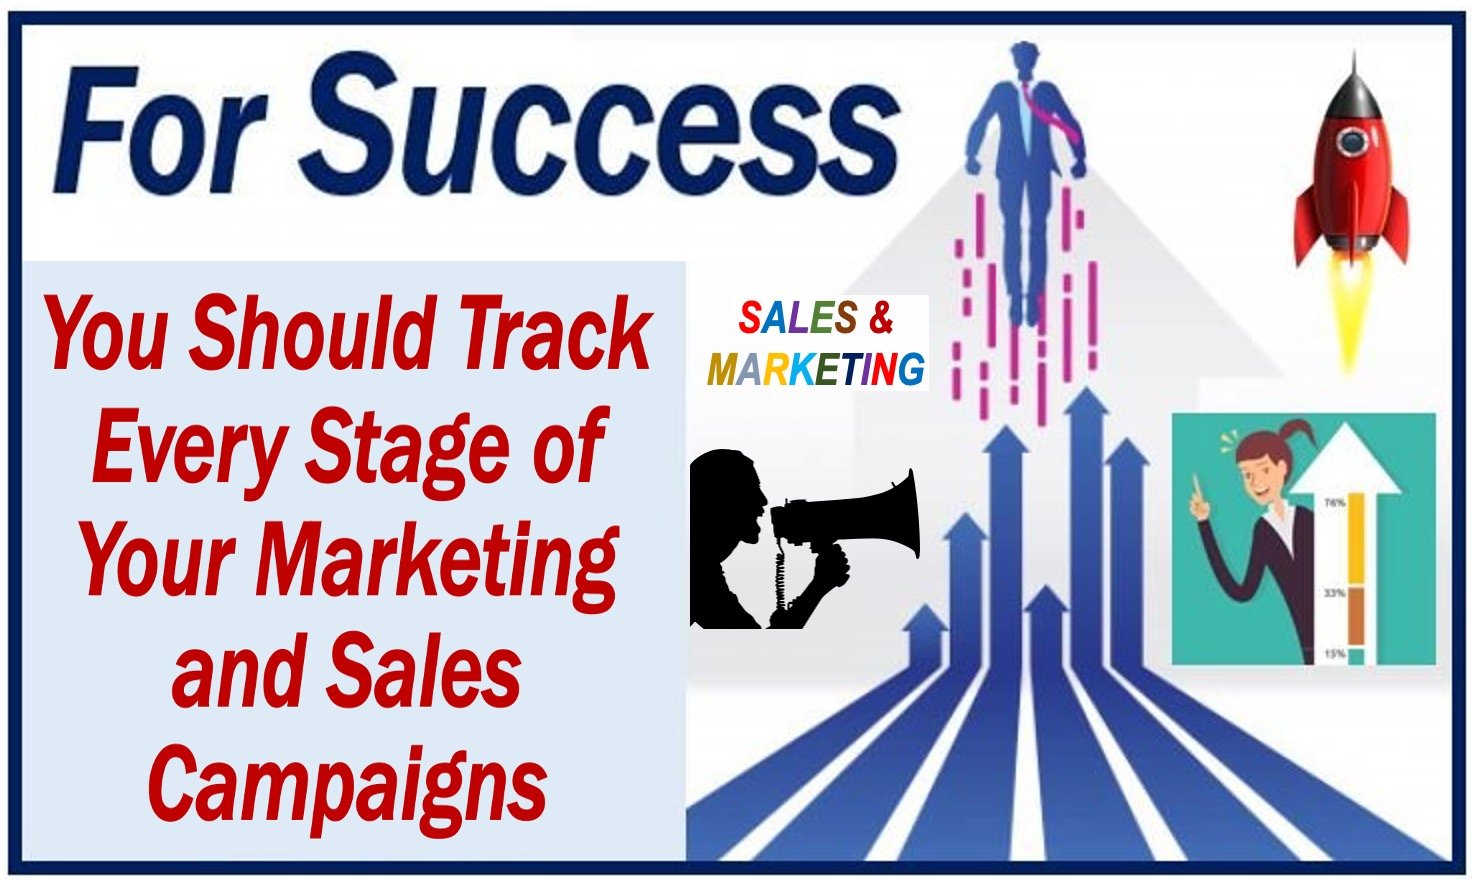 Sales and Marketing Campaign - Tracking